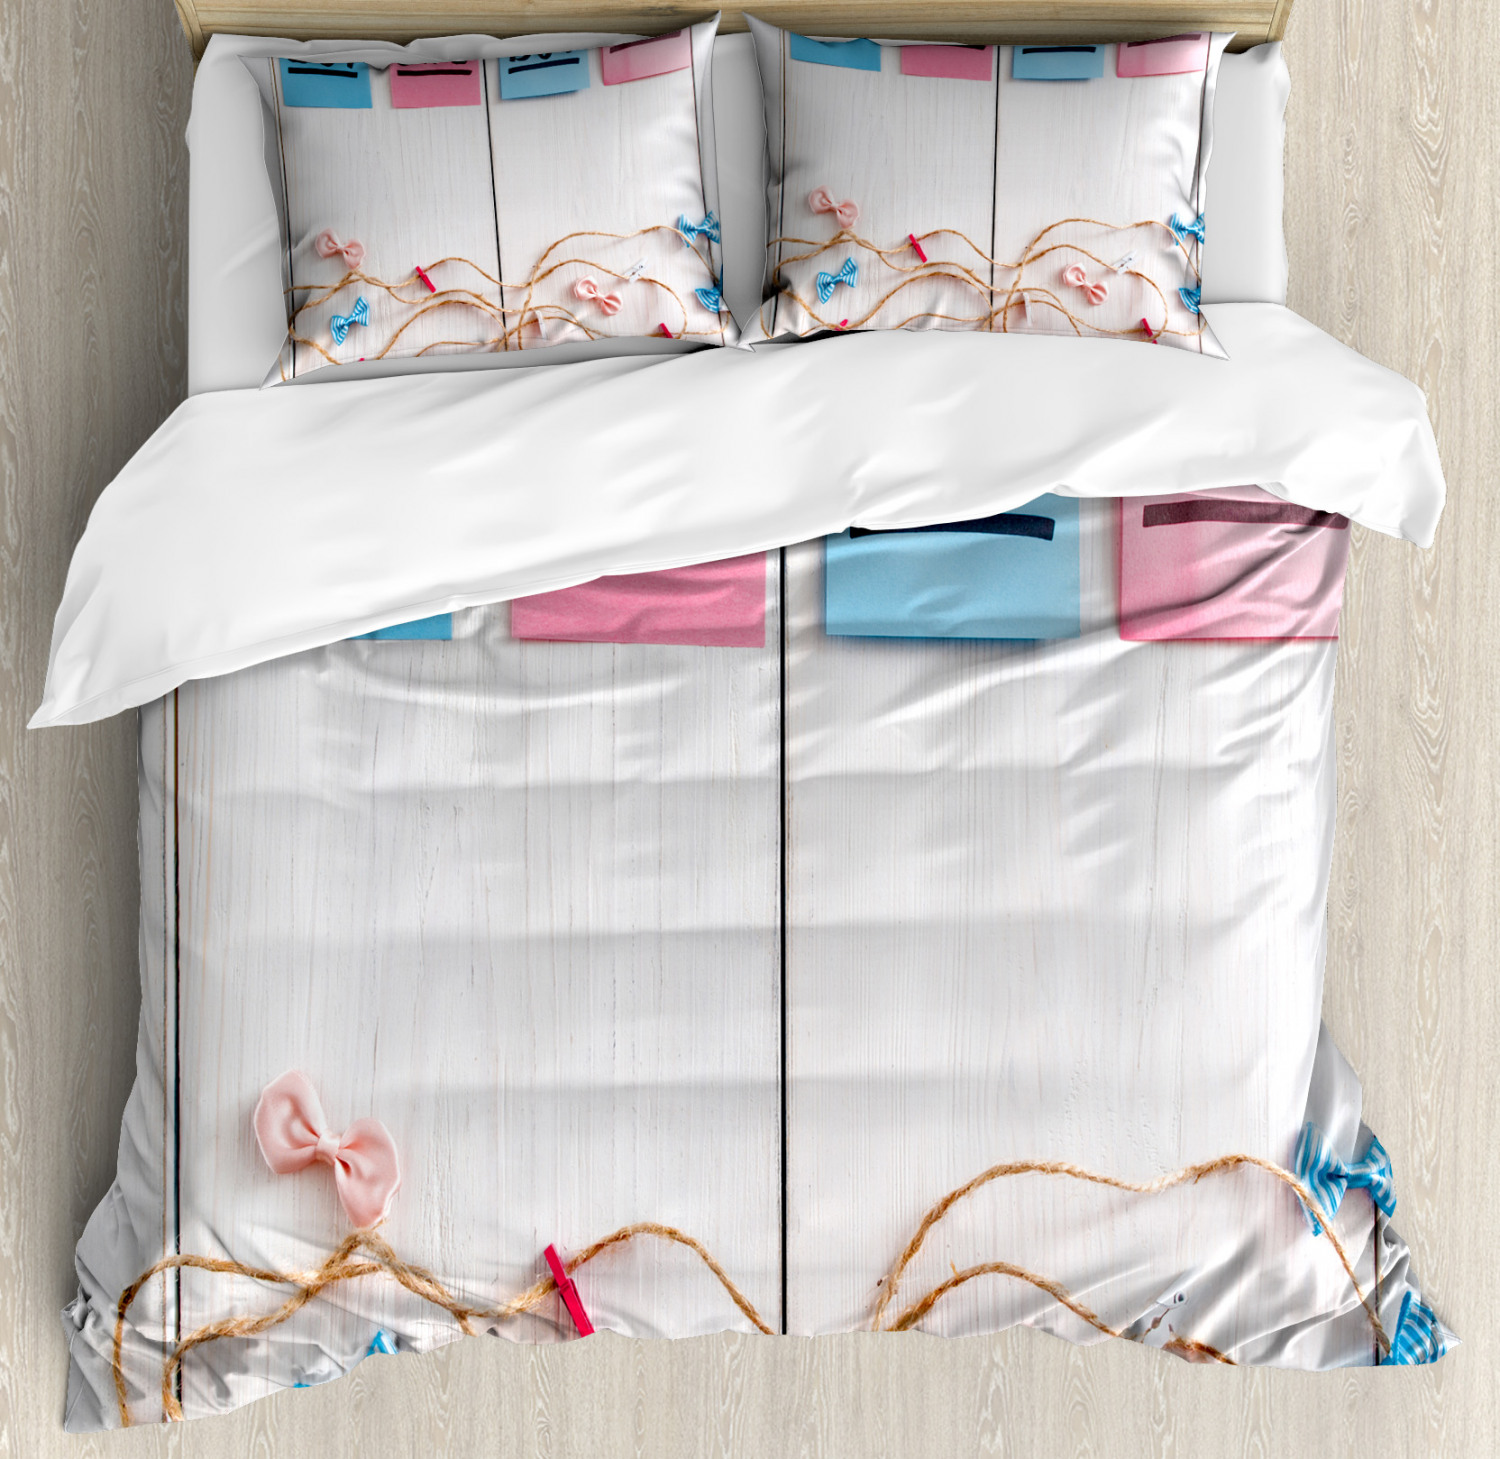 Colorful Duvet Cover Set With Pillow Shams Stickers Garland Wood